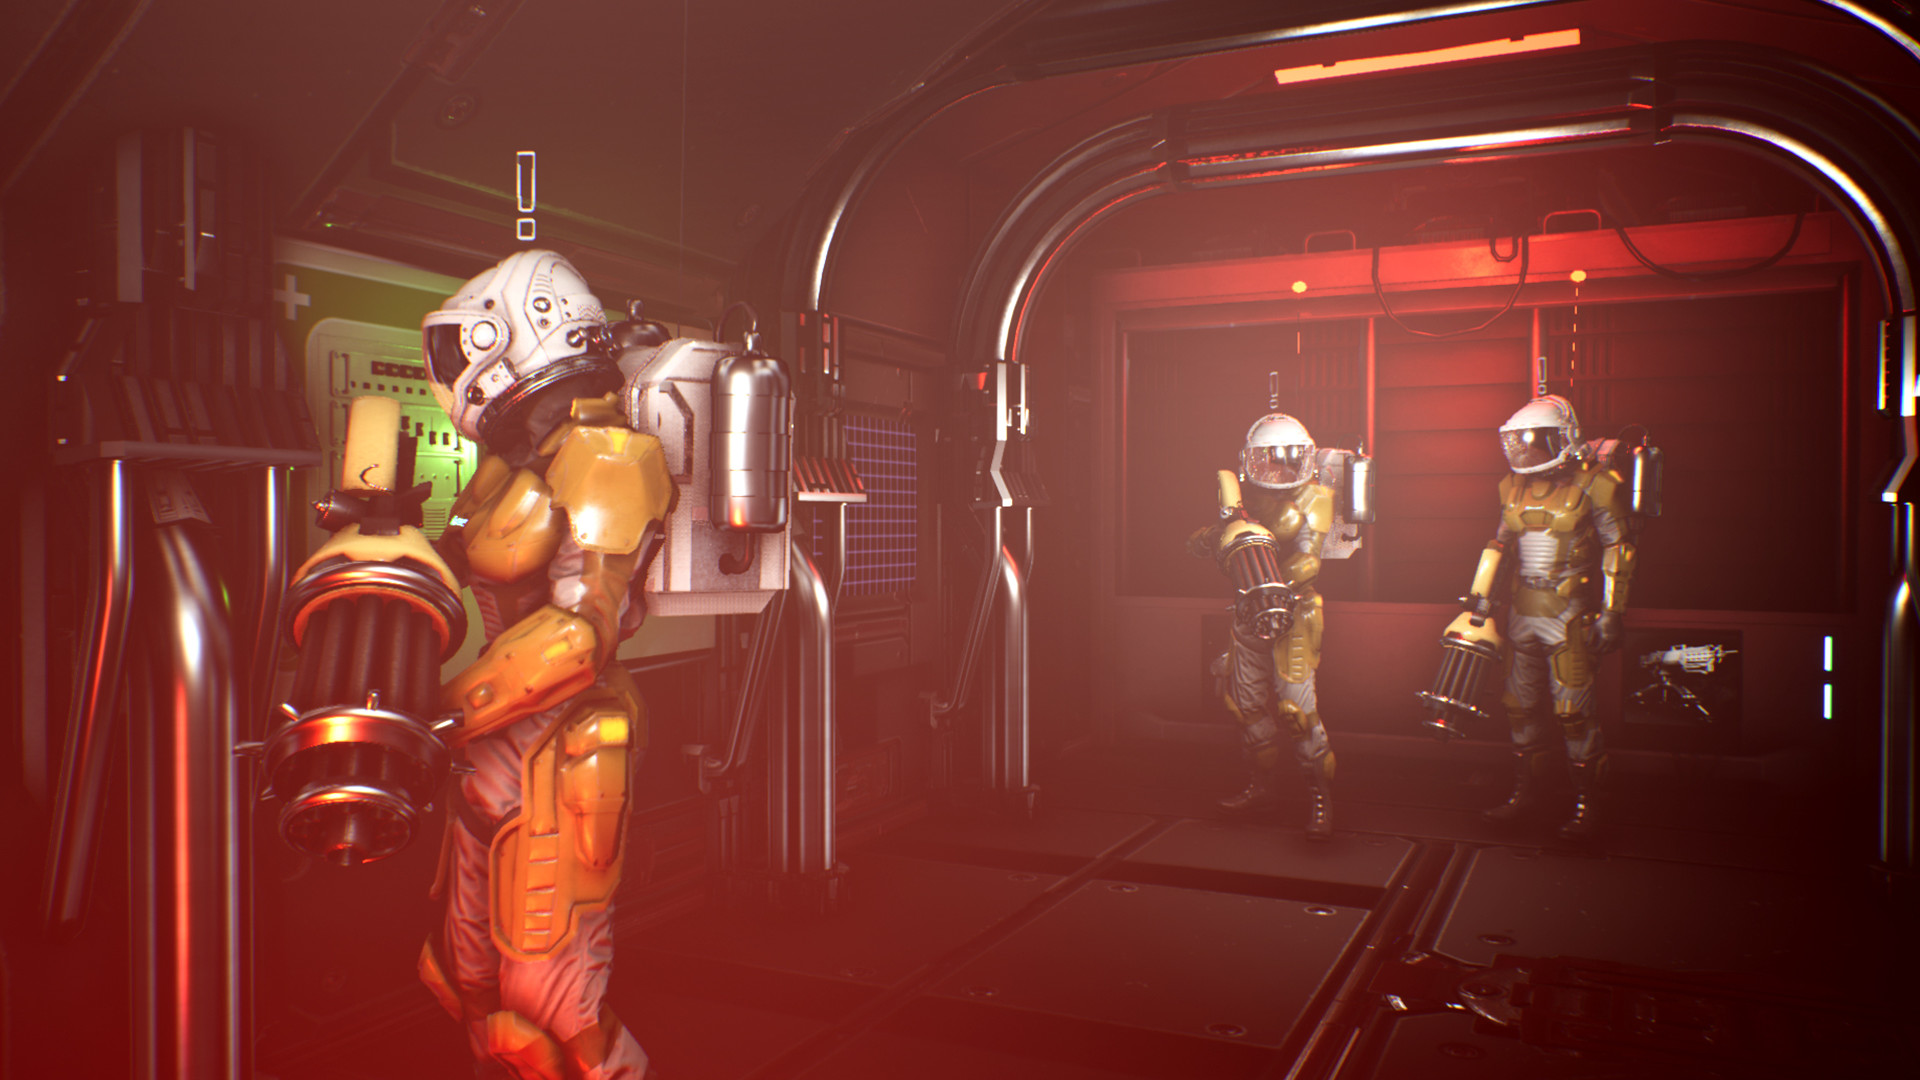 Genesis Alpha One Deluxe Edition Free Download